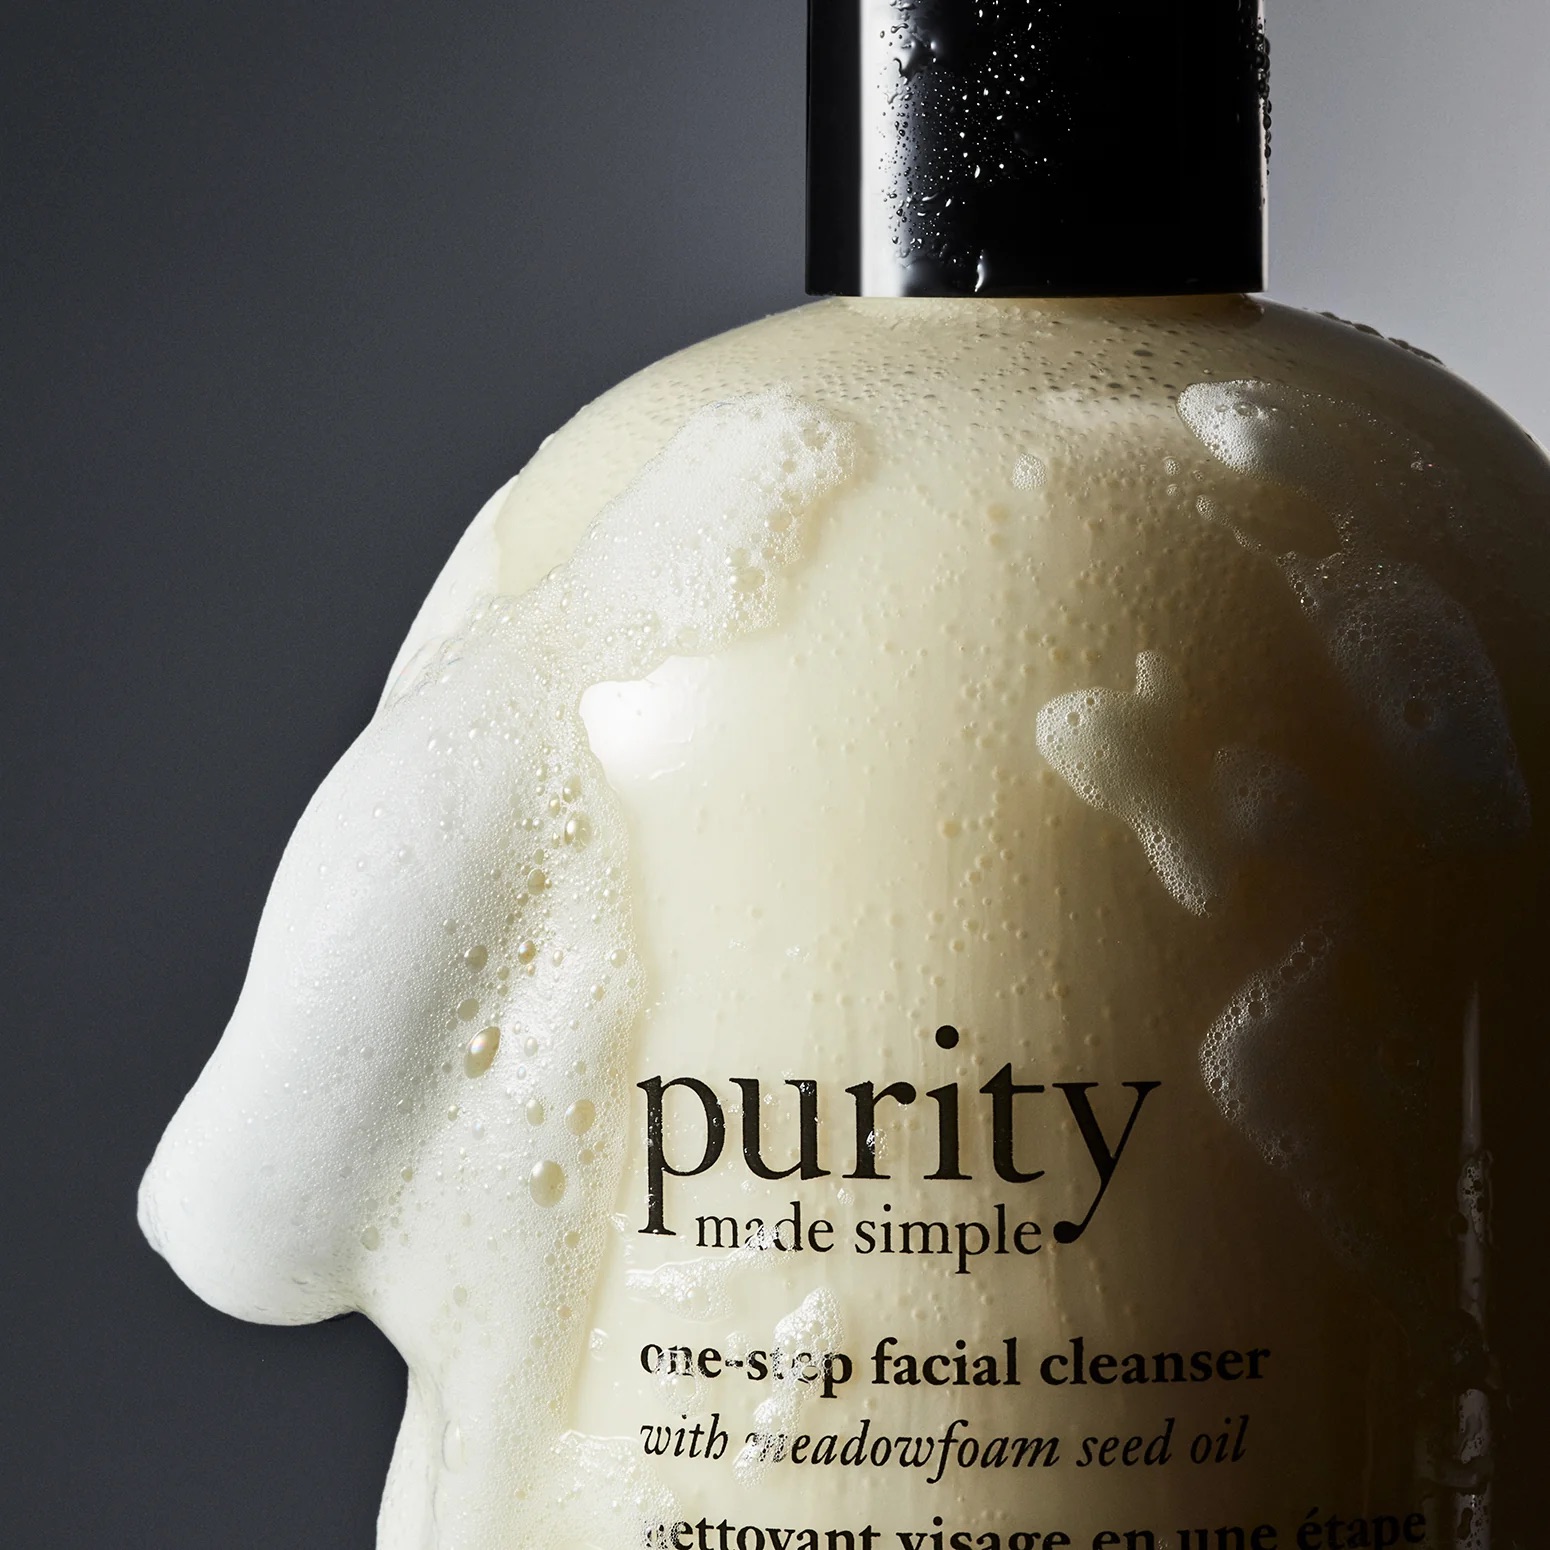 skincare, fragrances and bath & body products | philosophy – philosophy®